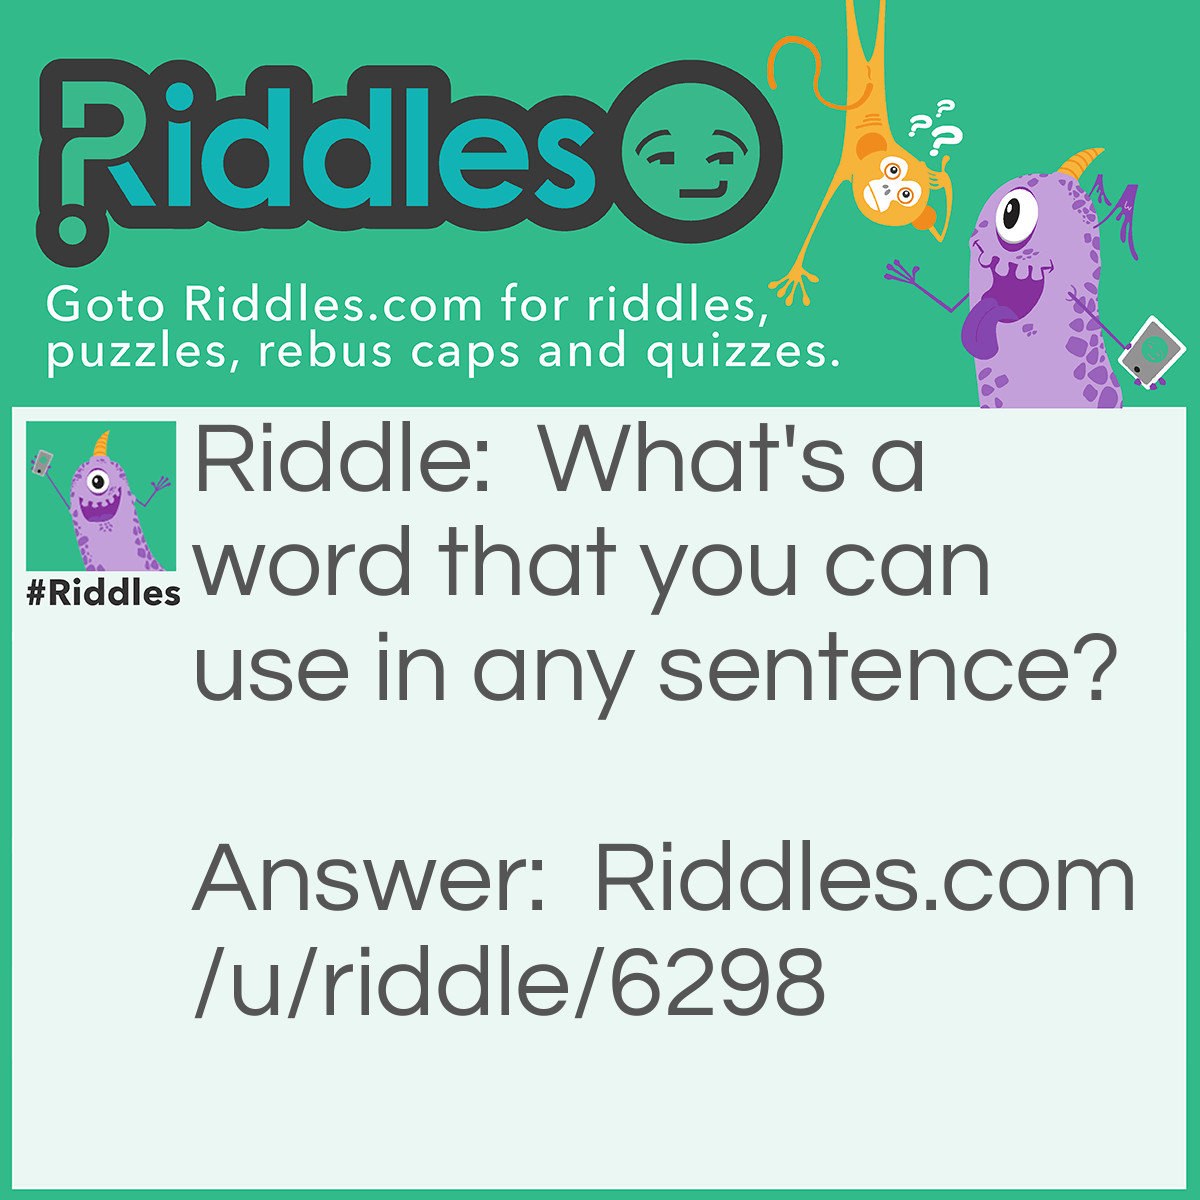 Riddle: What's a word that you can use in any sentence? Answer: Like.